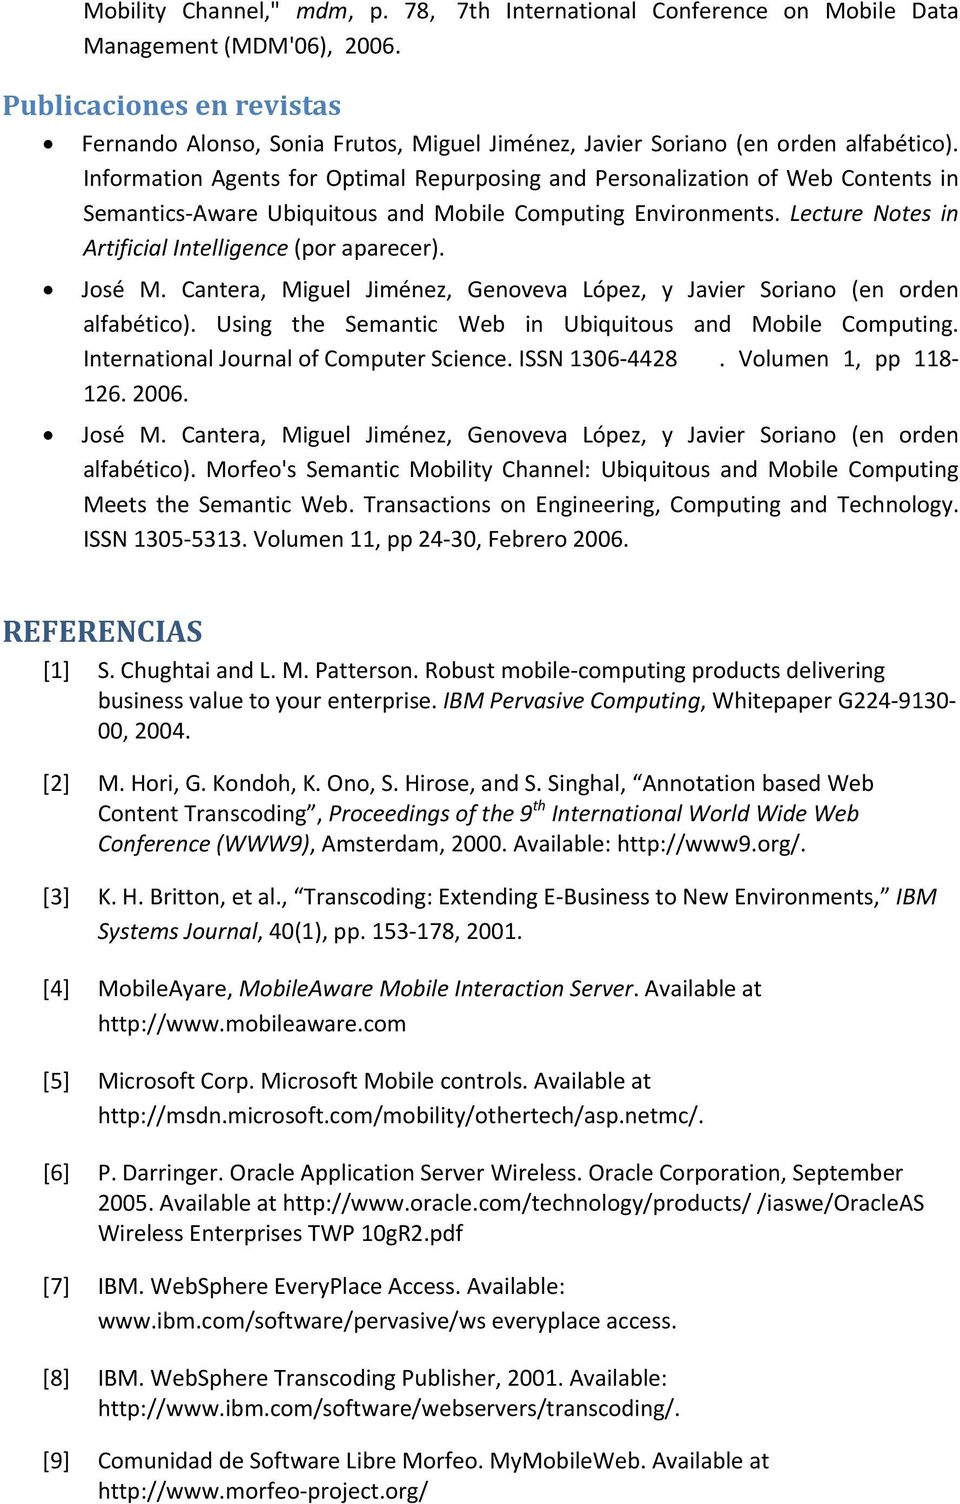 Information Agents for Optimal Repurposing and Personalization of Web Contents in Semantics Aware Ubiquitous and Mobile Computing Environments. Lecture Notes in Artificial Intelligence (por aparecer).